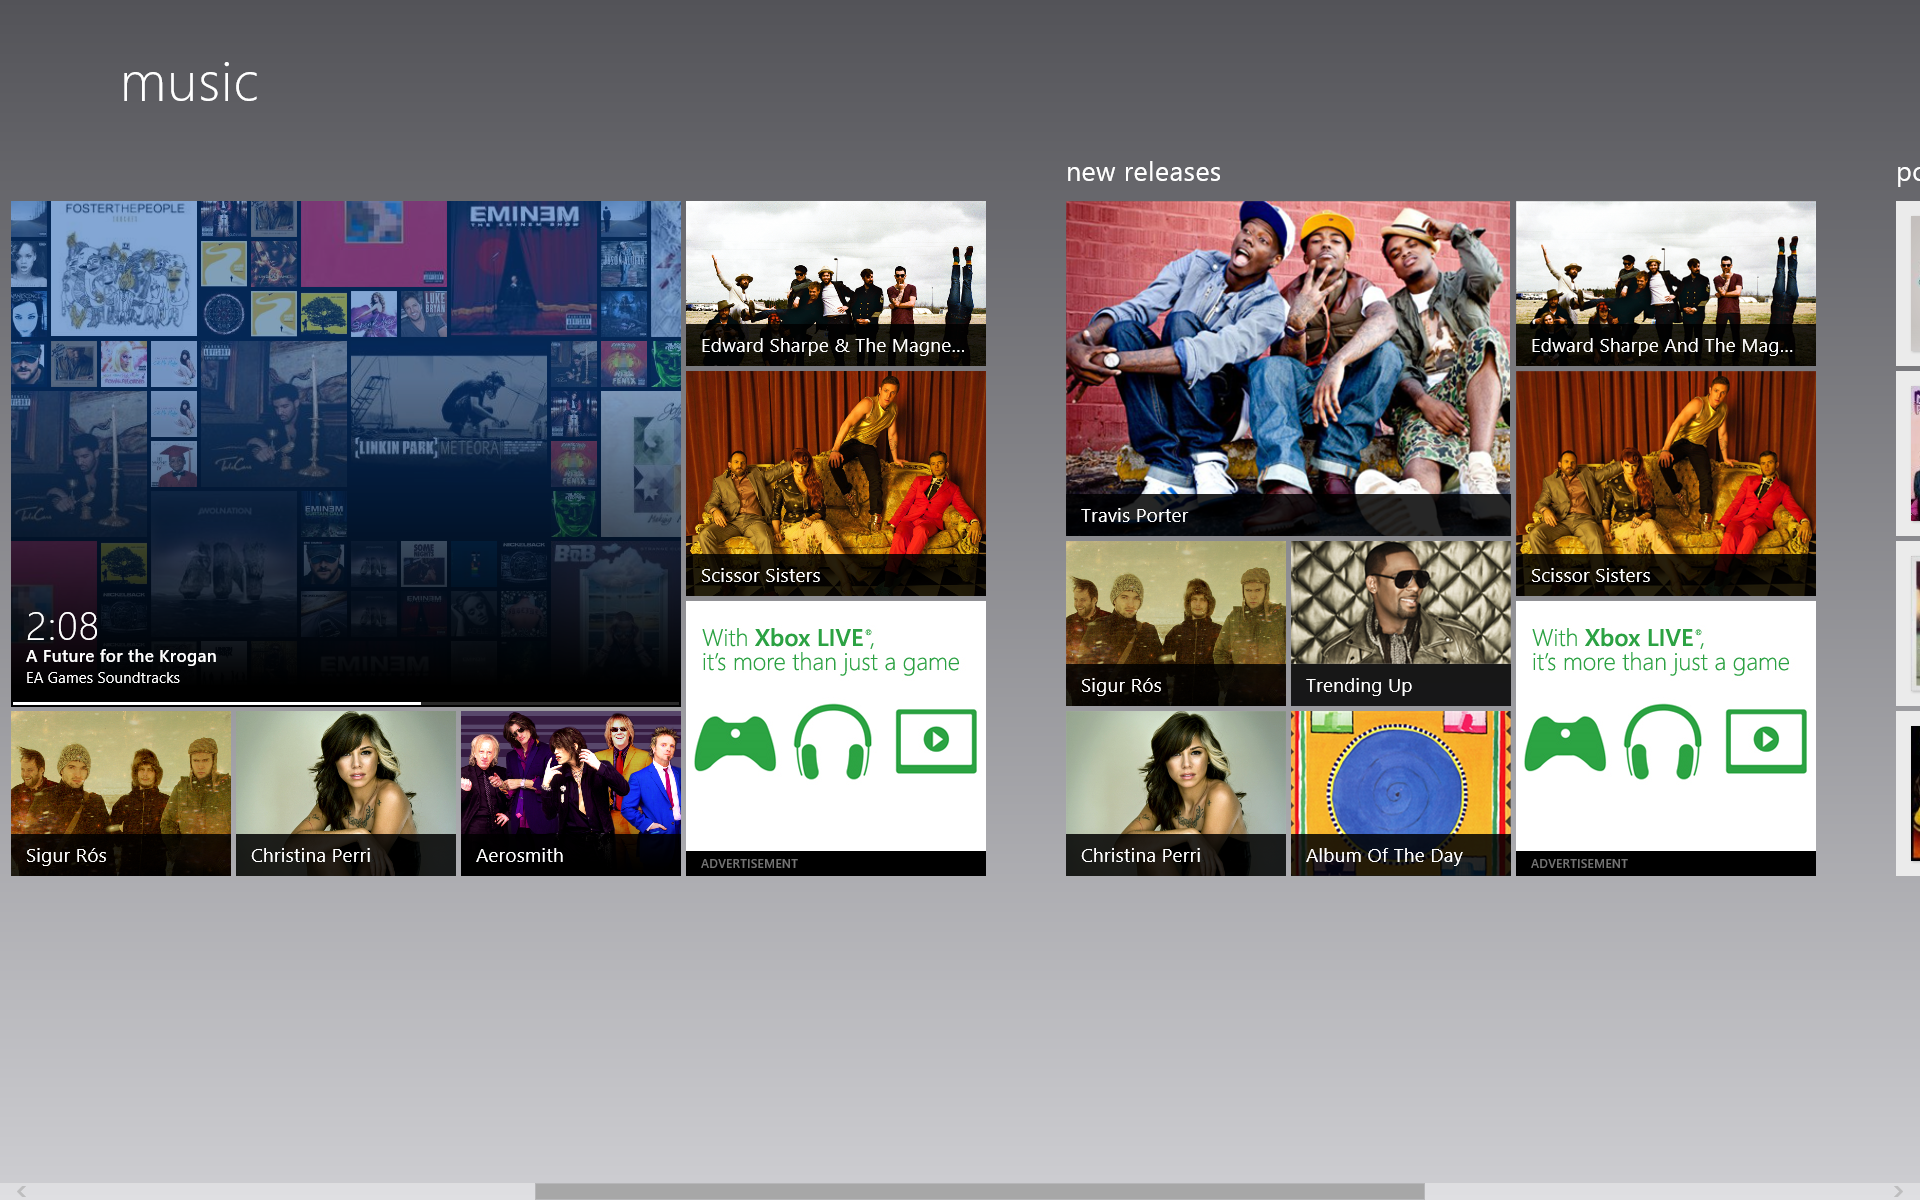 Windows 8 Music app - for some reason we don't have an alt tag here